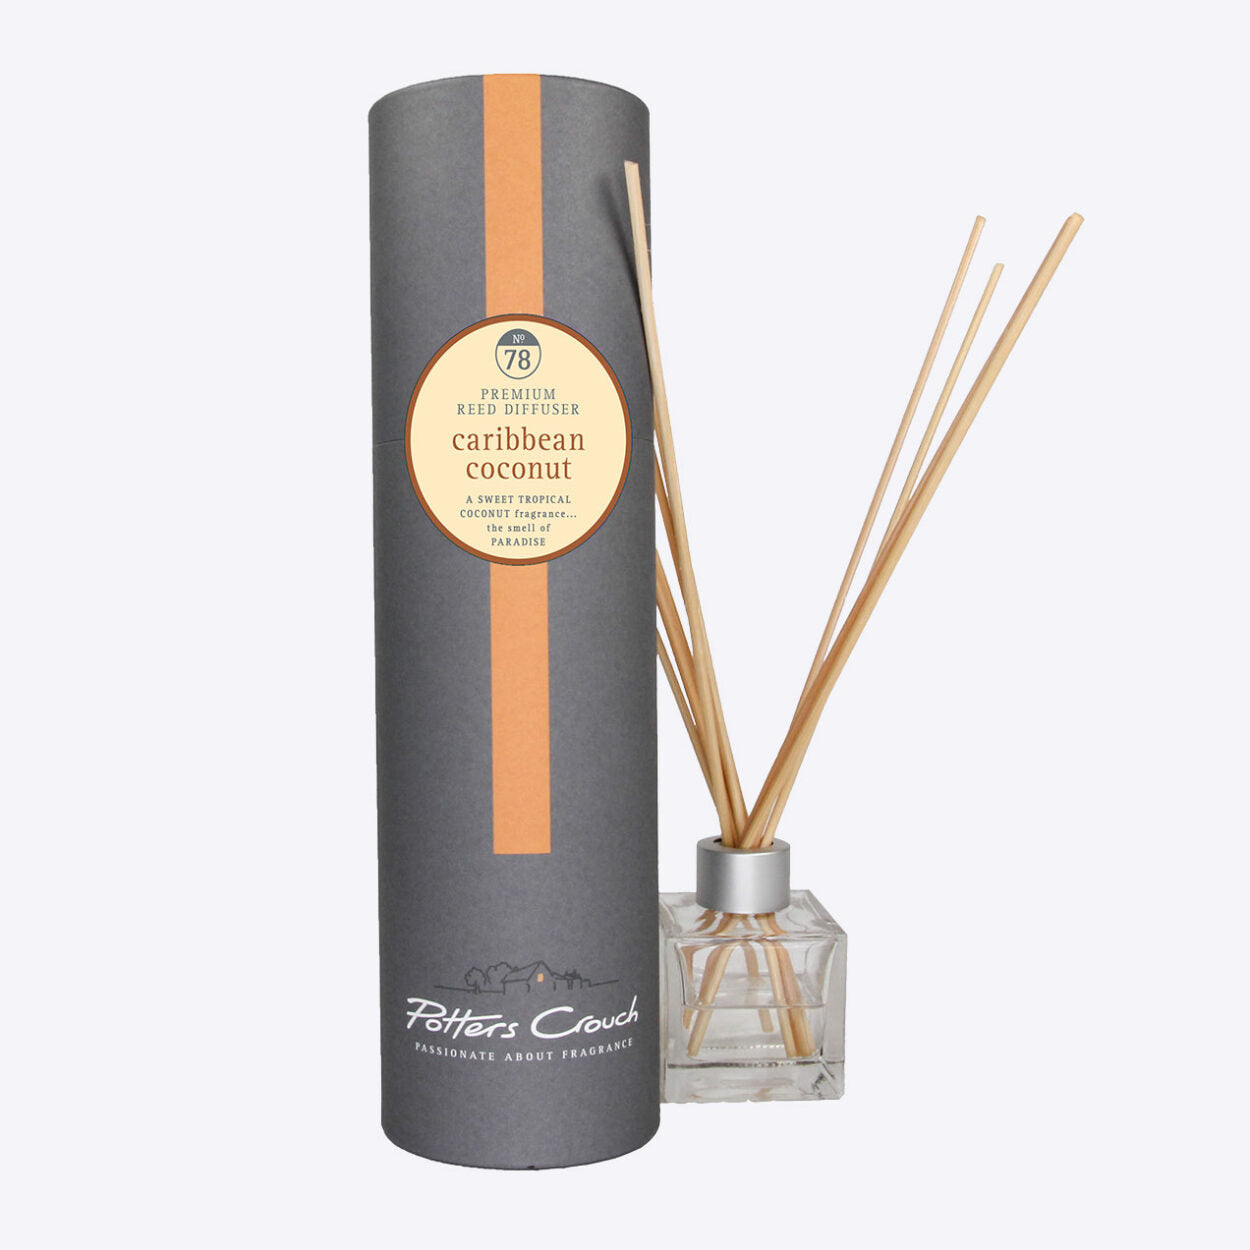 Potters Crouch Caribbean Coconut Premium Reed Diffusers 100ml